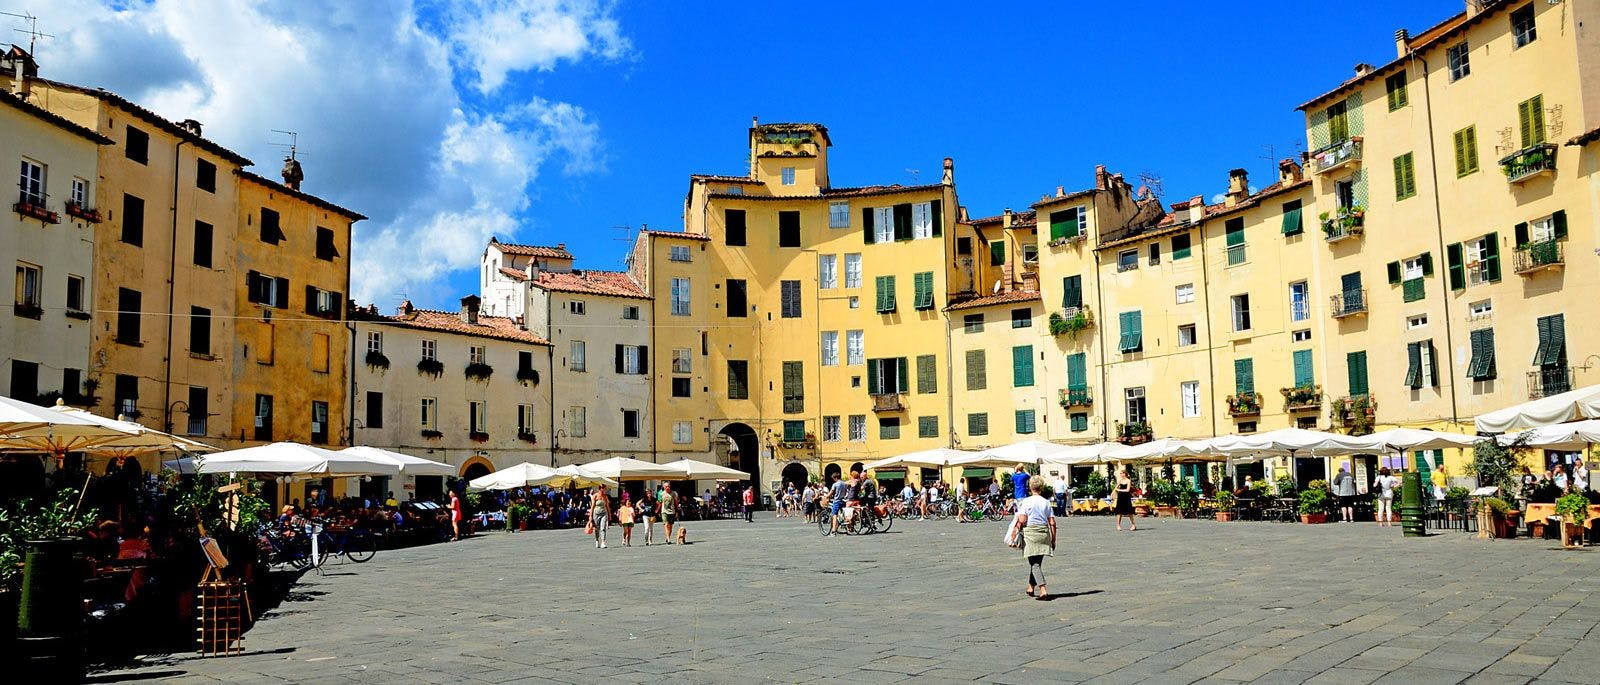 The central town square of Lucca, with yellow buildings around a central plaza